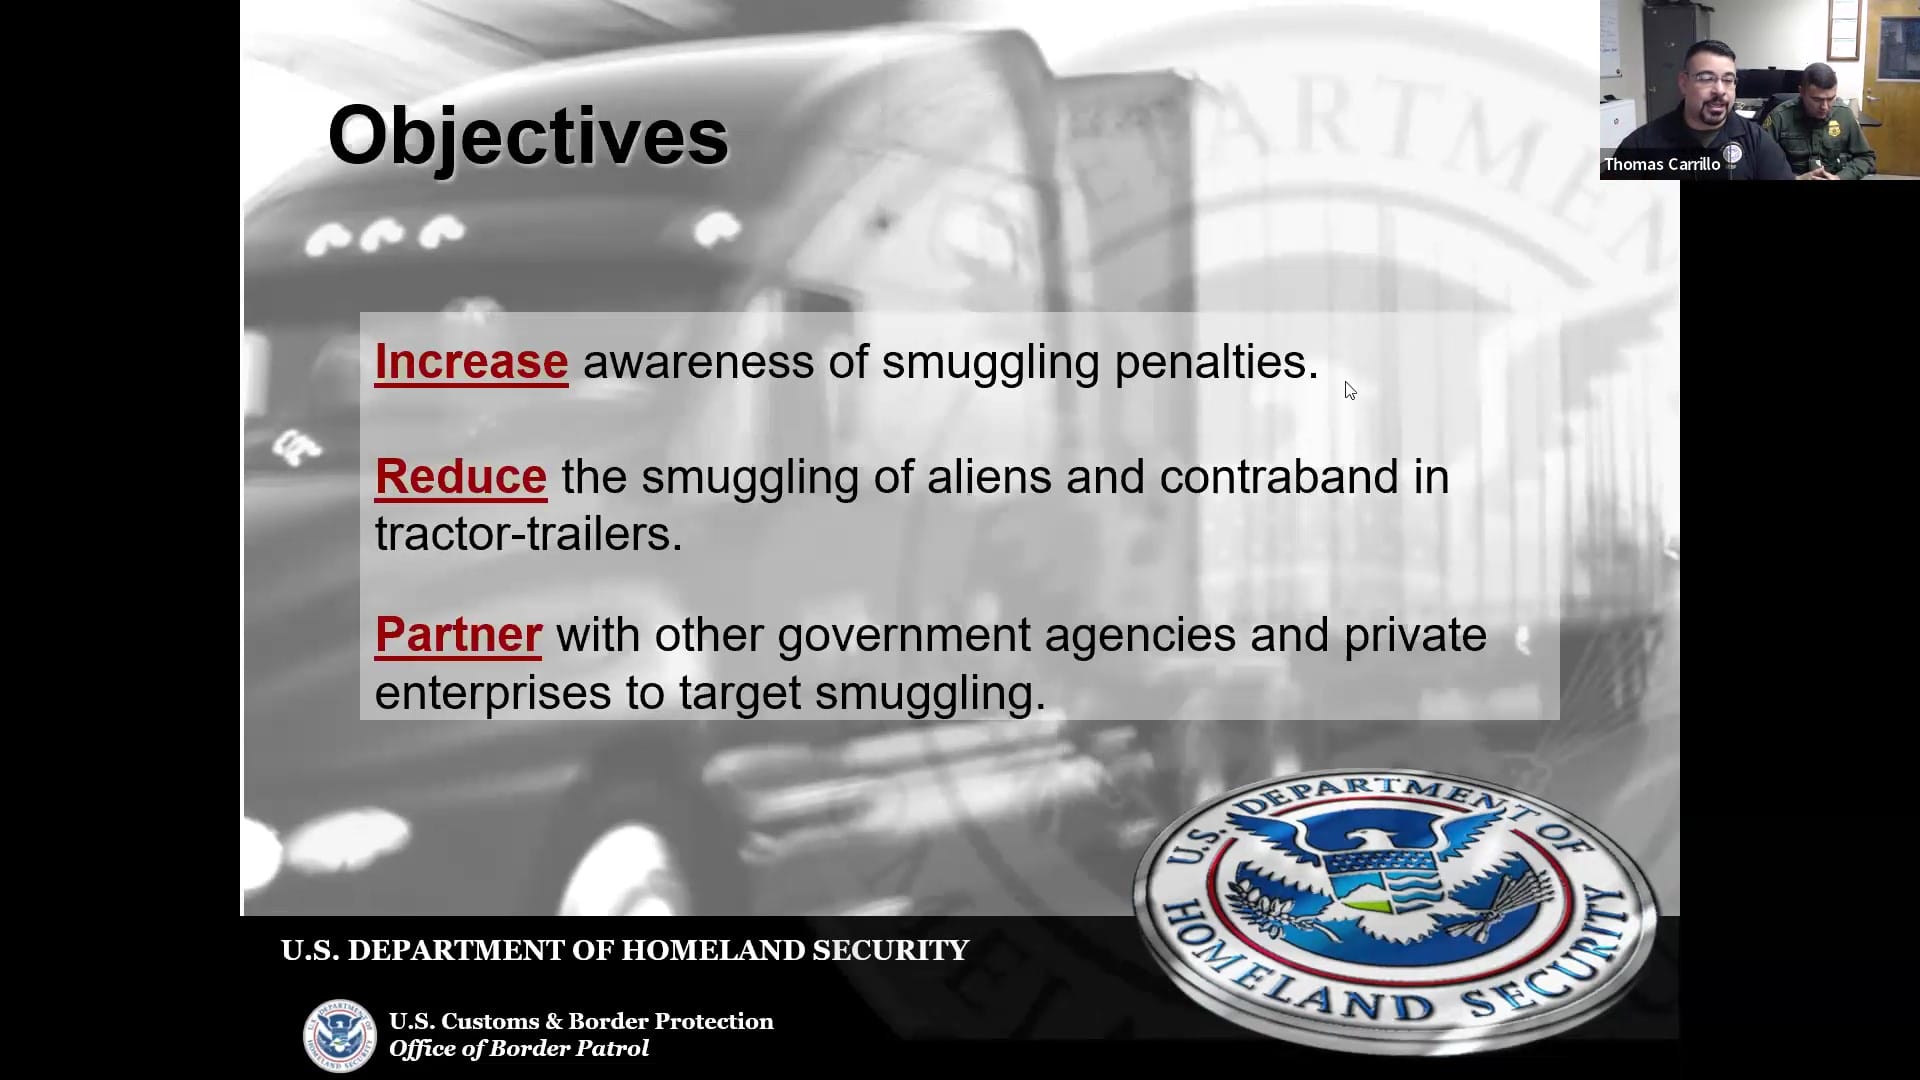 US Border Patrol to Truck Drivers Objectives